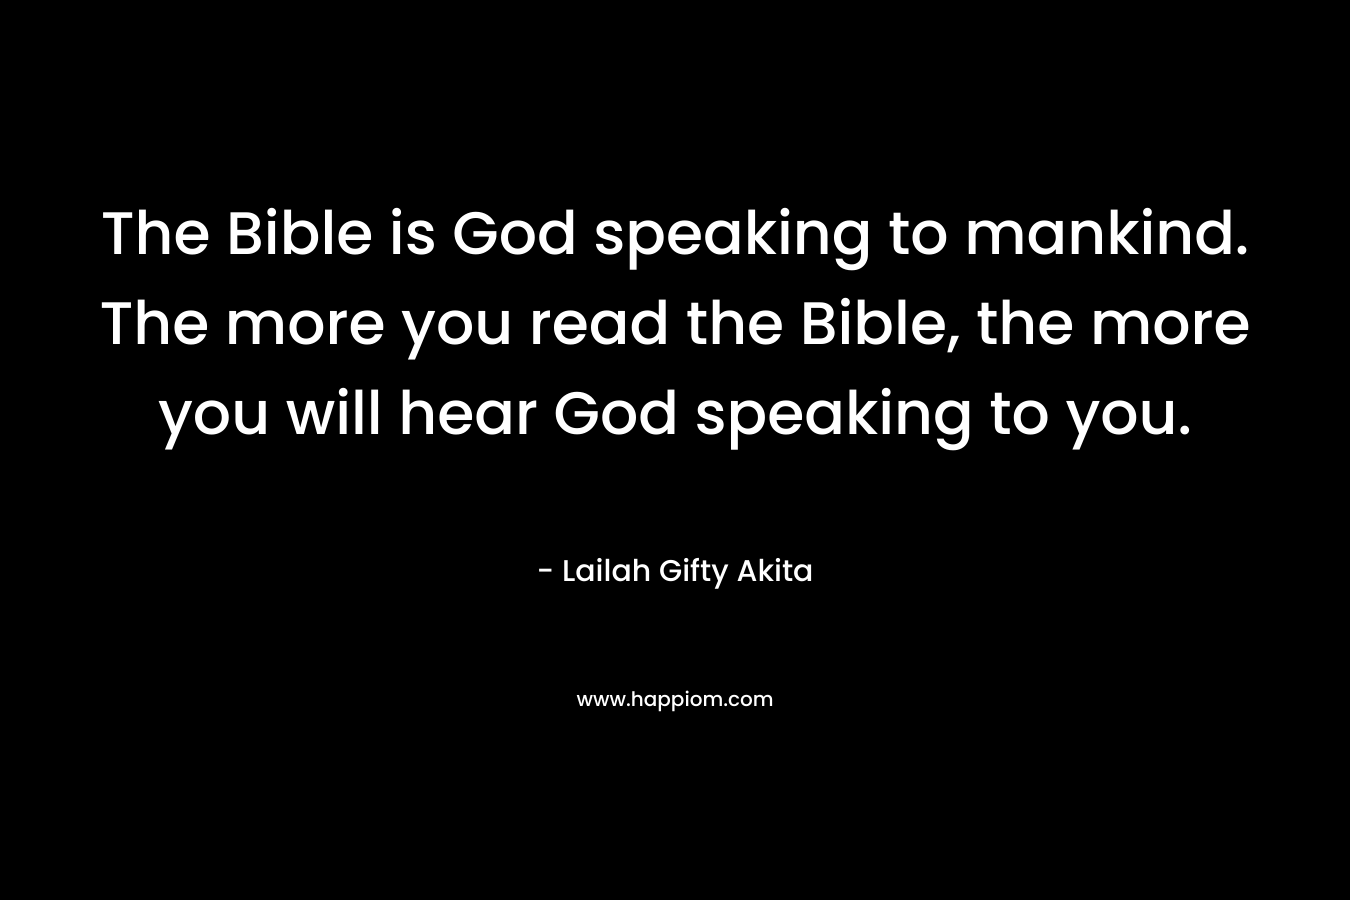 The Bible is God speaking to mankind. The more you read the Bible, the more you will hear God speaking to you.